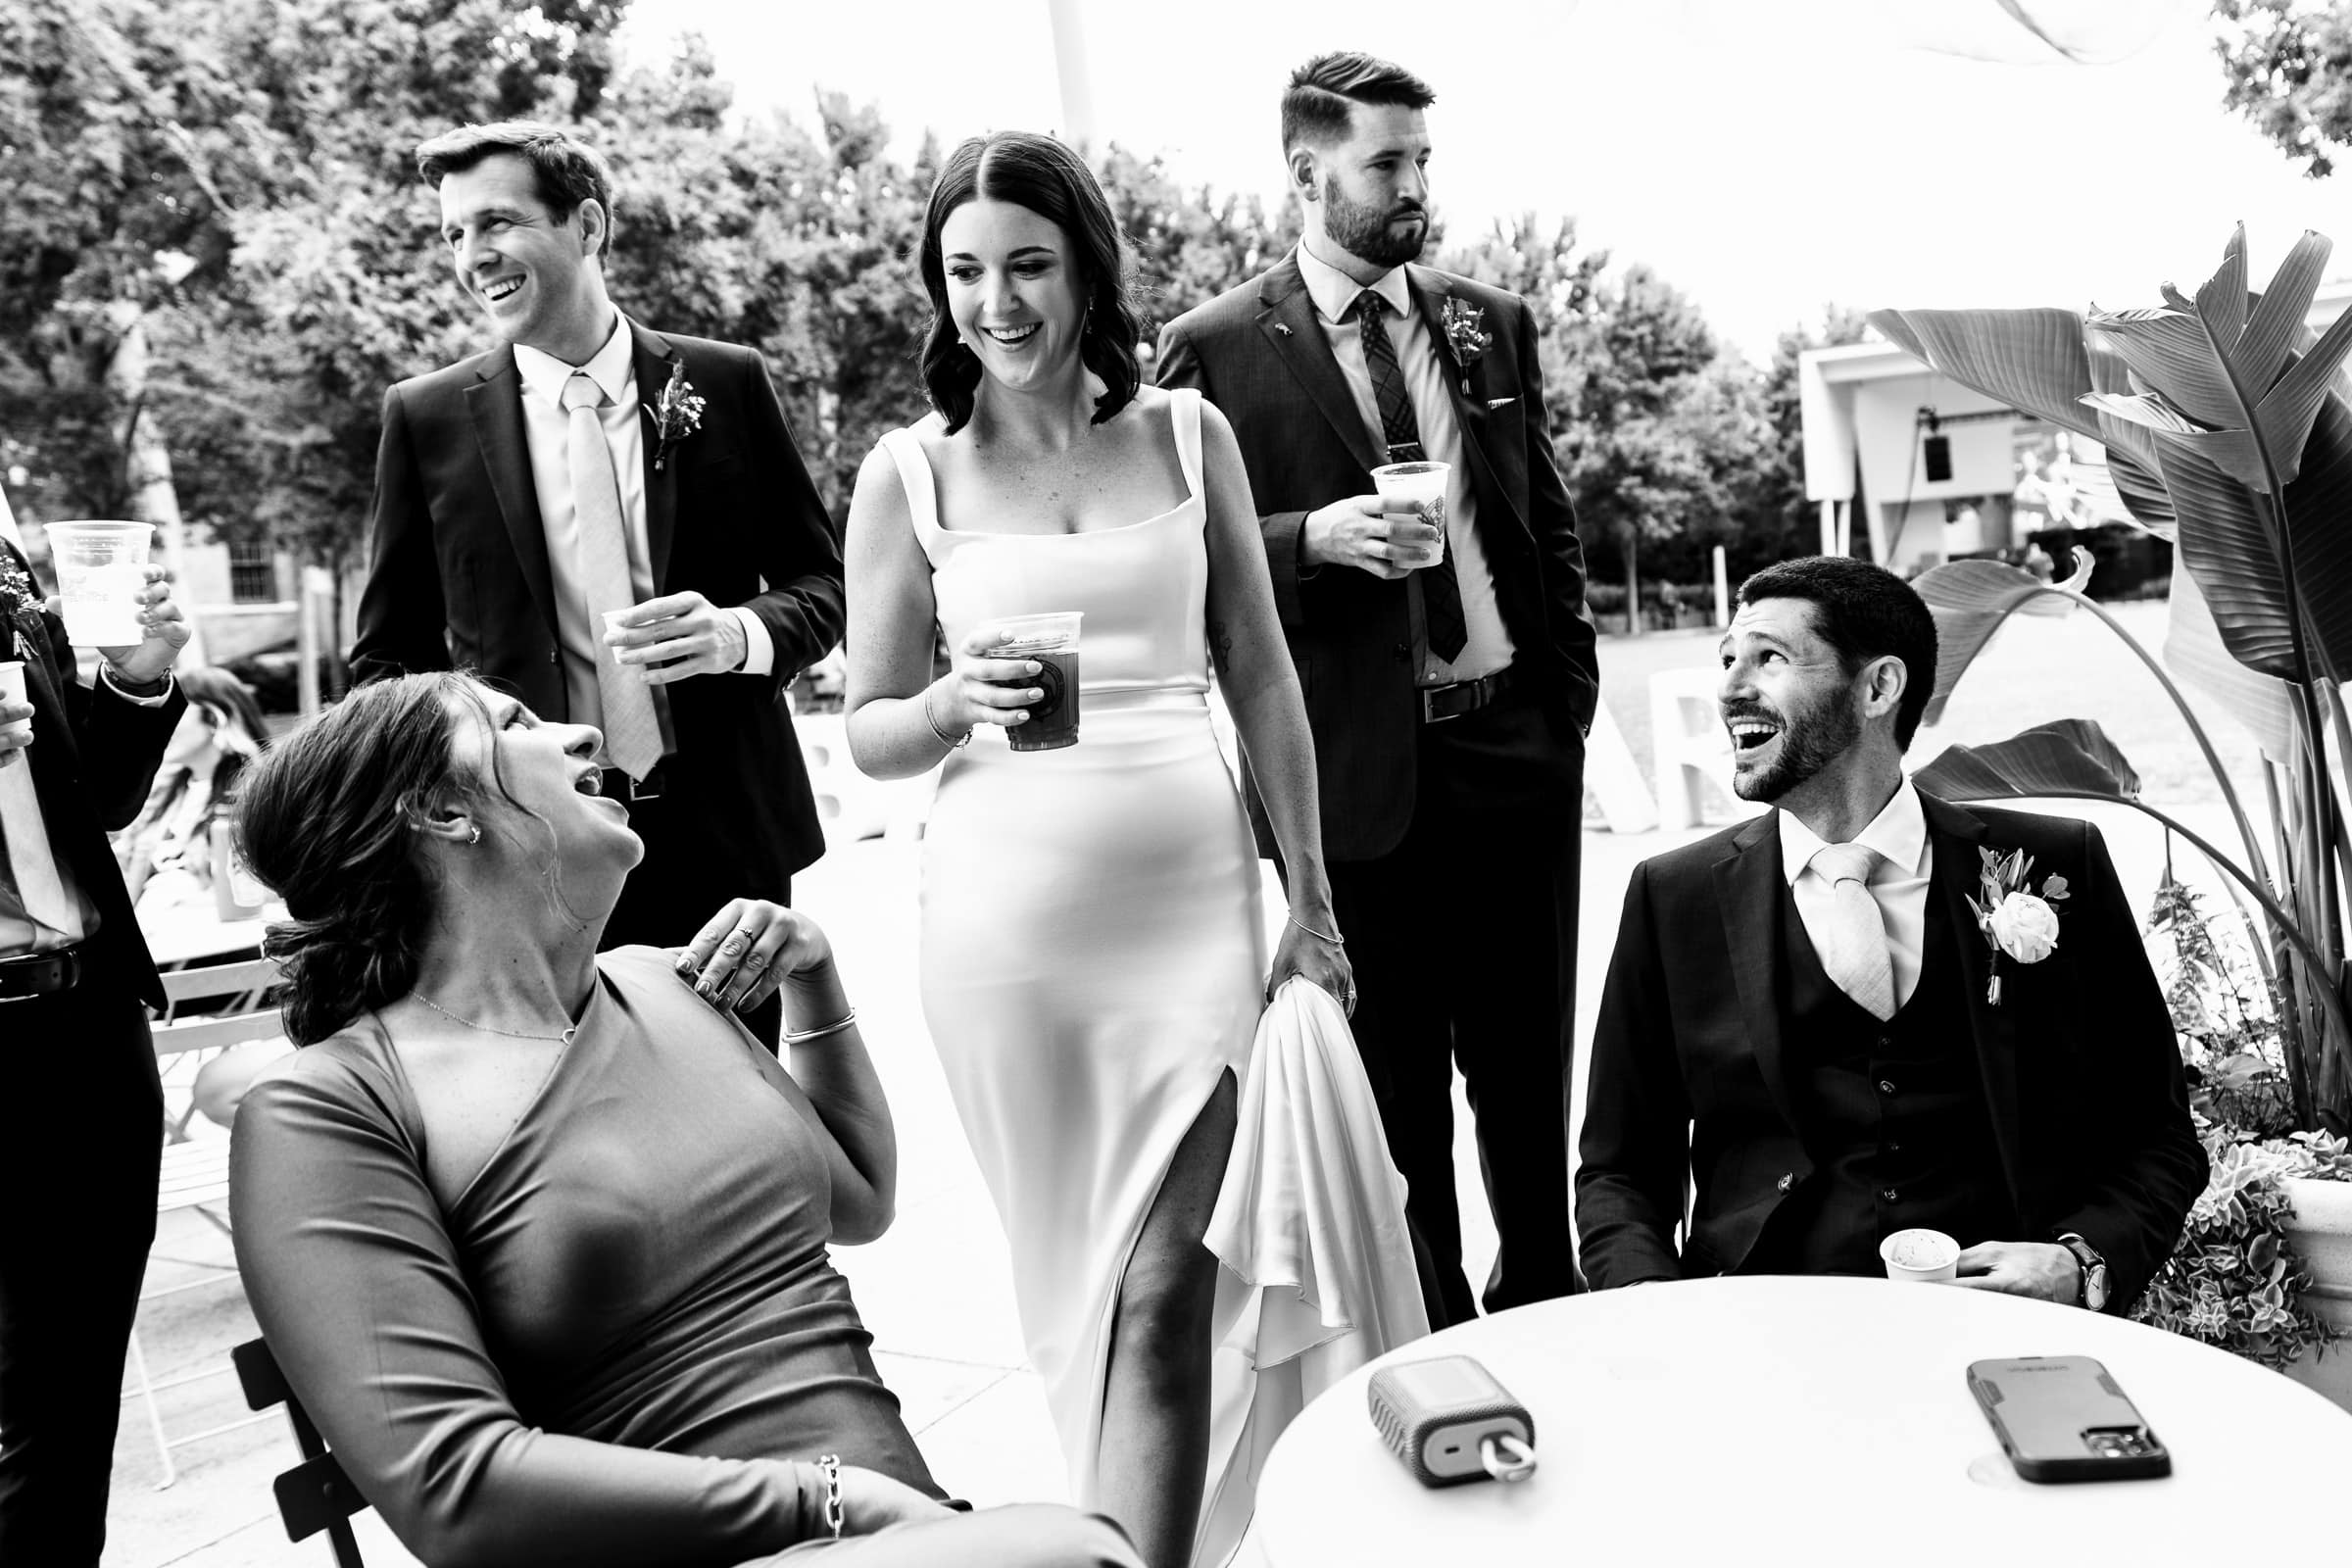 a couple in wedding attire laughs with their friends | photos by Kivus & Camera